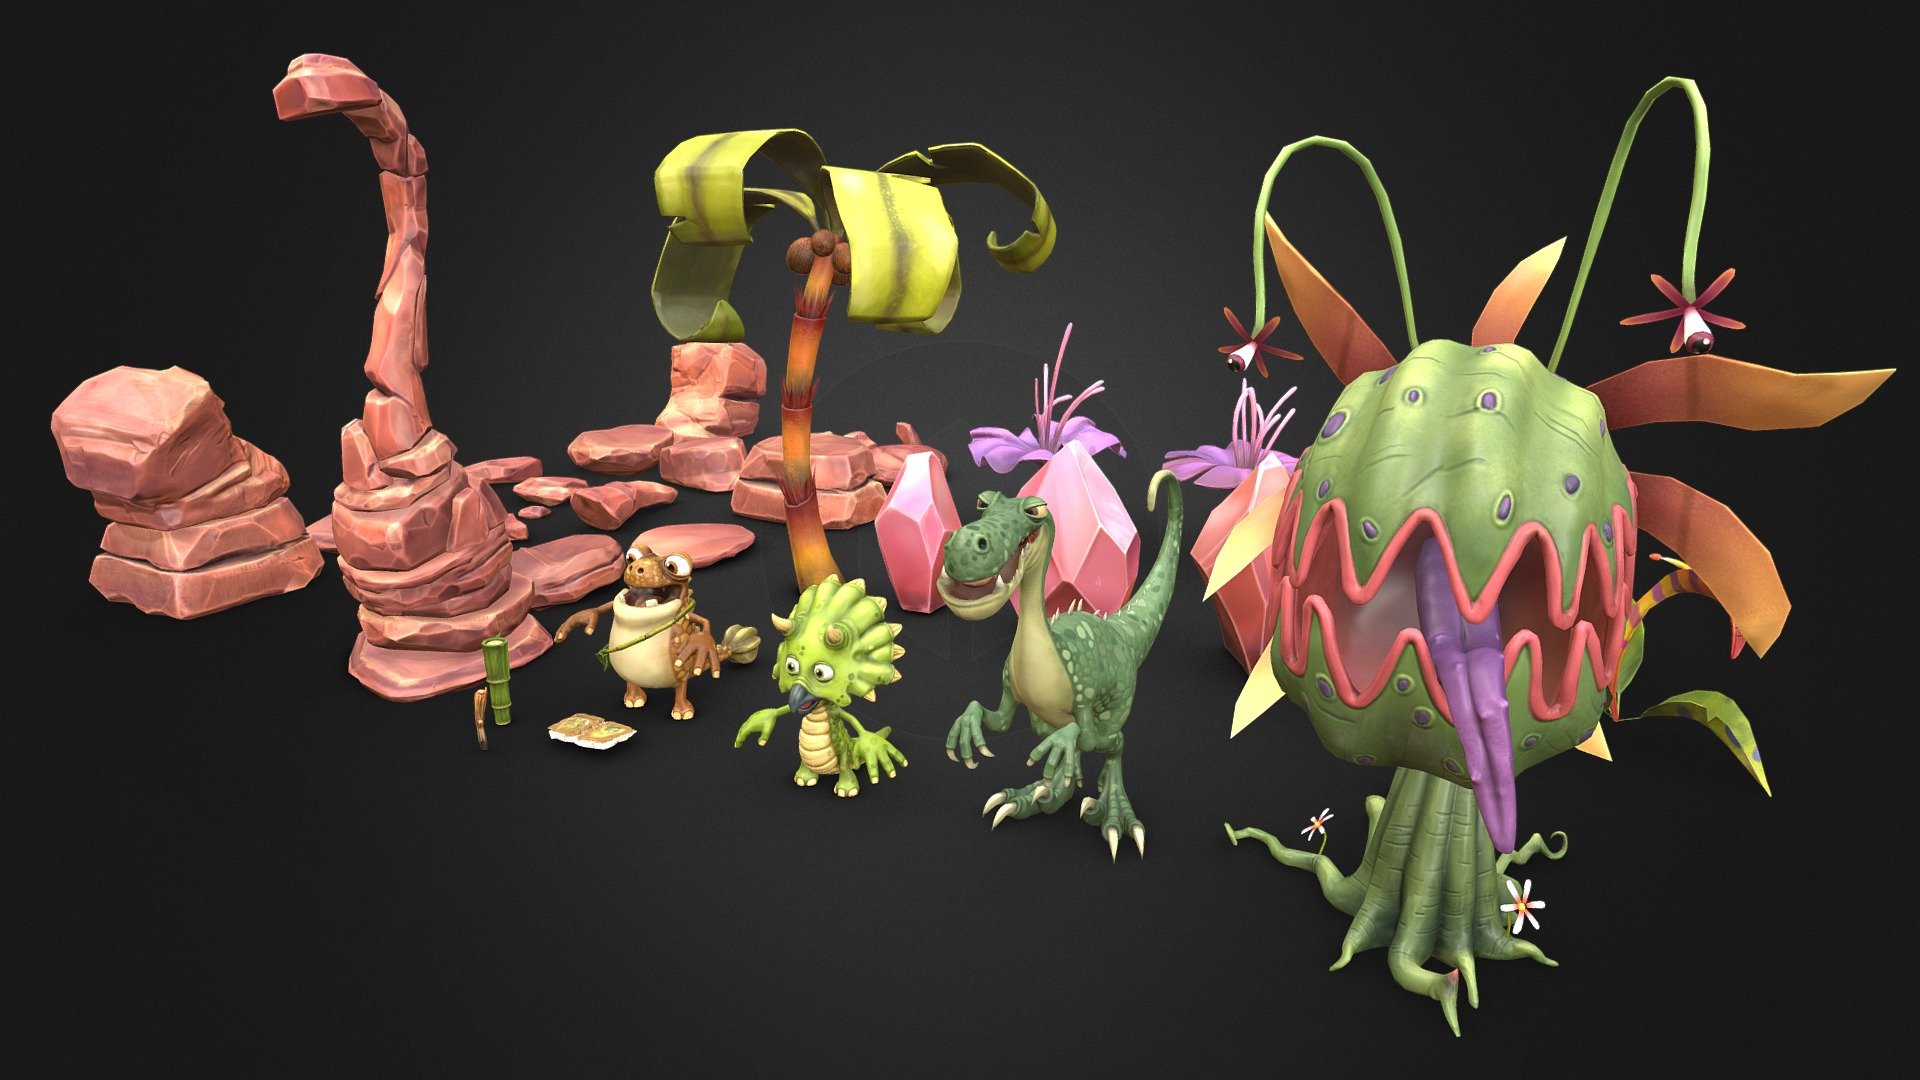 Characters finished so far : Maxu, Tiny, Cror, Carnivorous

Many more environment assets are finished (plants, grass, etc) but I wait to have enough to fill another texture before posting it here. 
I plan to make a few more characters (Tutor, Archie, Bill, Rocky).
And then I'll mount a quiet big scene with all that ! Tons of work.

Sculpting / modeling : ZBrush 
Retopology : 3D-Coat, 3DS Max
Unwrapping : RizomUV
Painting : ZBrush, Substance Painter, Photoshop


Gigantosaurus designs by © Cyber Group Studios - Disney 2018 - Gigantosaurus (Modeling in Progress) - 3D model by hansolocambo 3d model